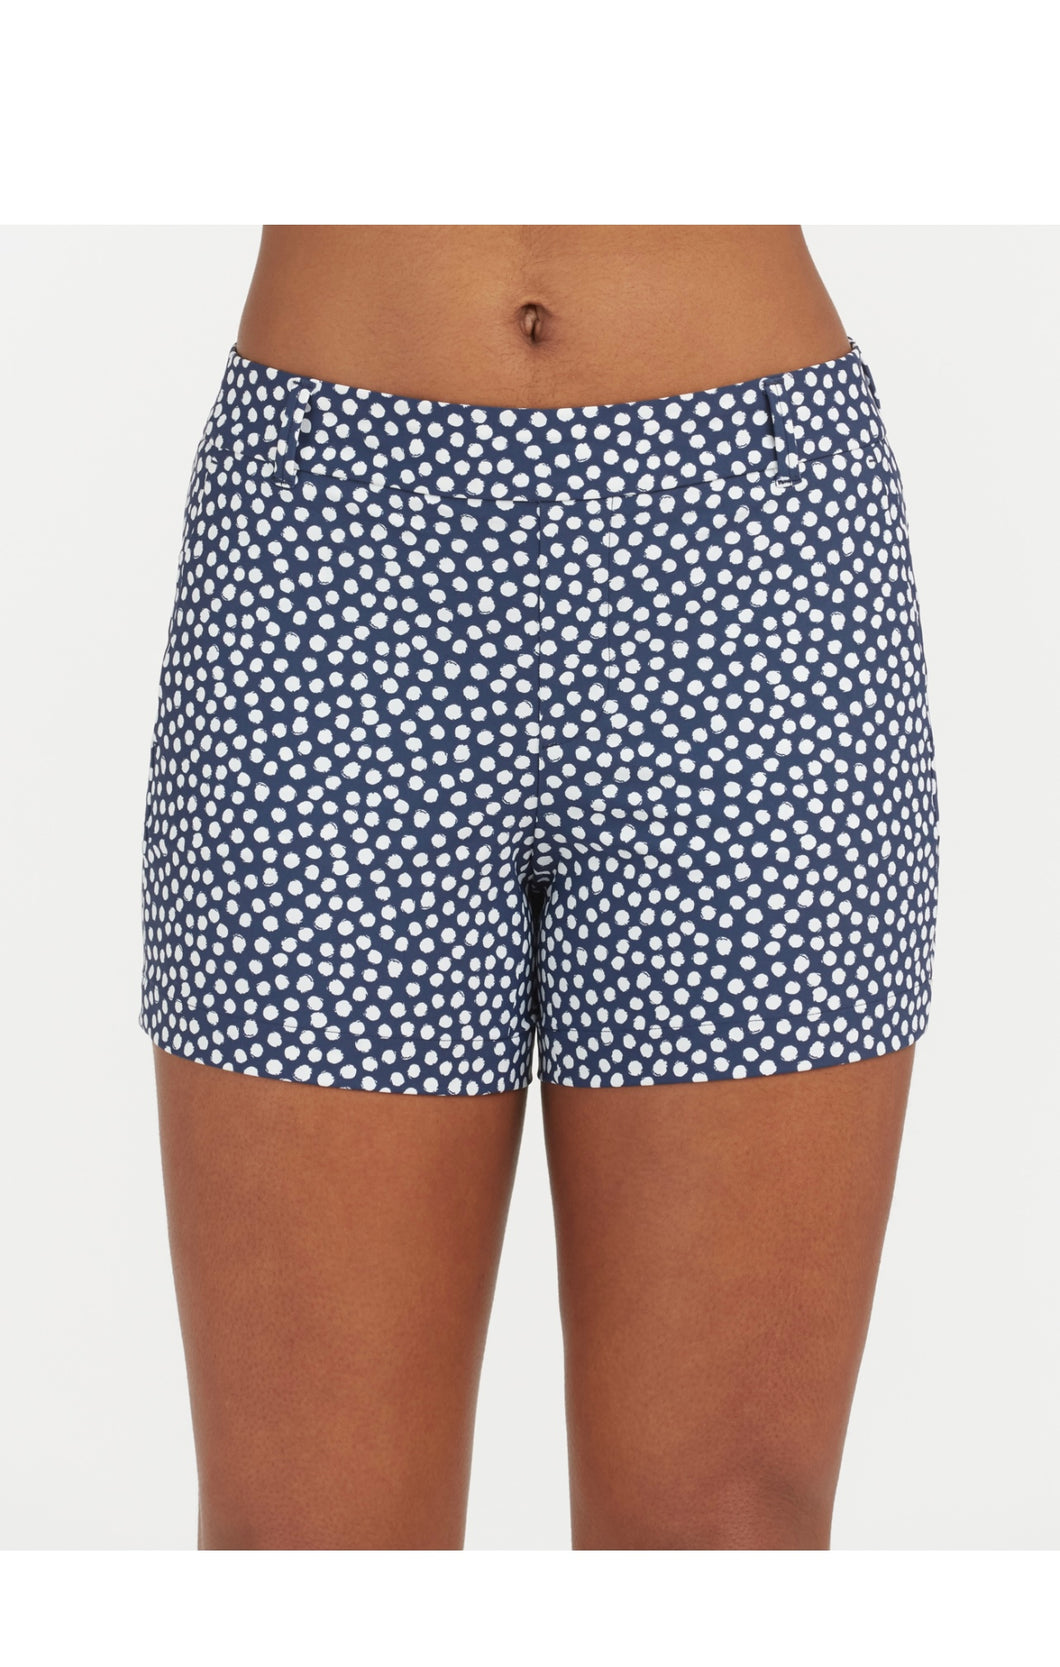 Spanx: Sunshine Shorts 4” in Navy Painted Dot